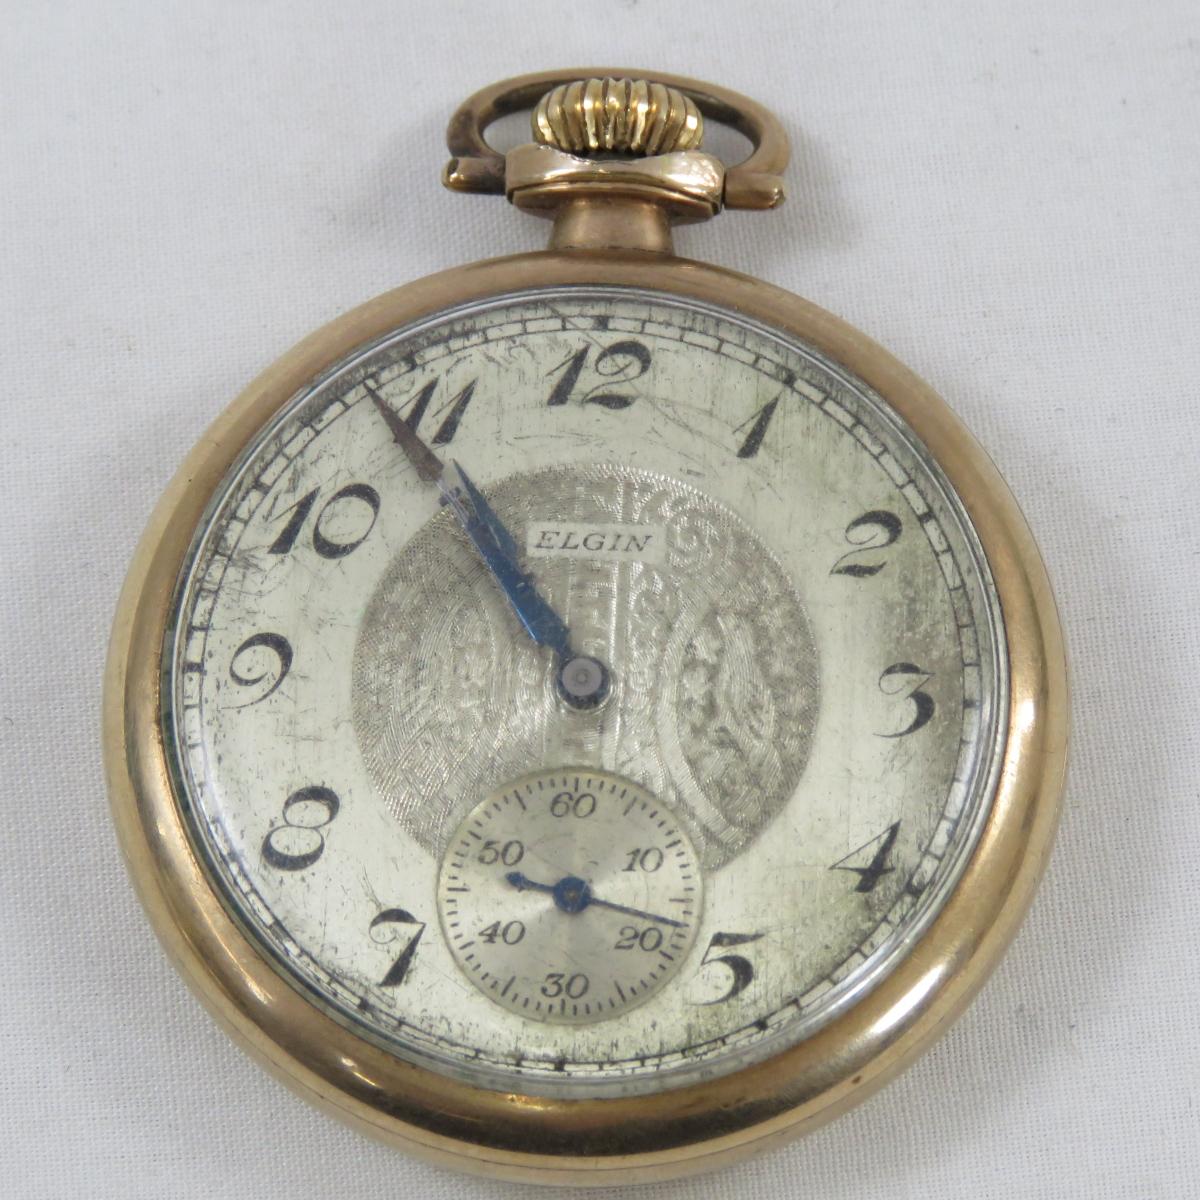 1920 & 1926 Elgin Open Face Pocket Watches